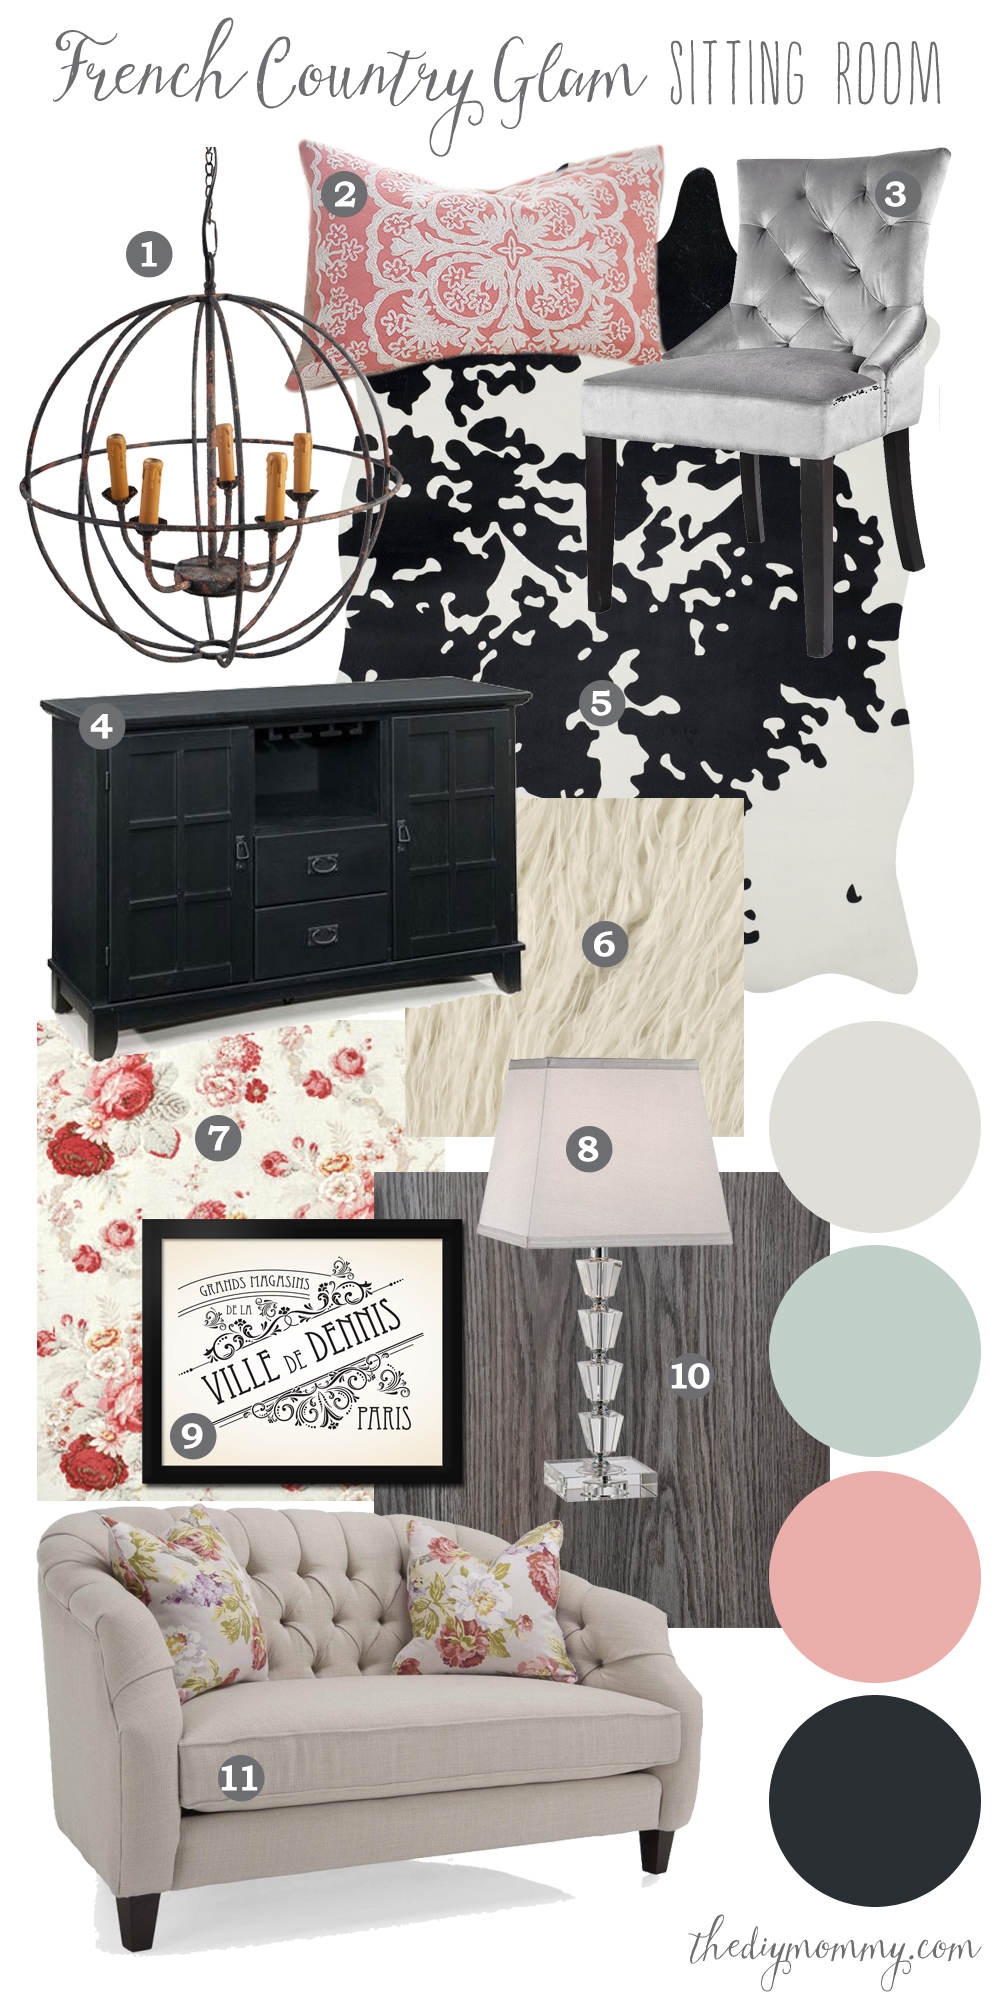 Mood Board: Modern French Country Glam Sitting Room. A formal living room featuring classic french country items mixed with more modern items. The pallate is mint, coral, black and cream.